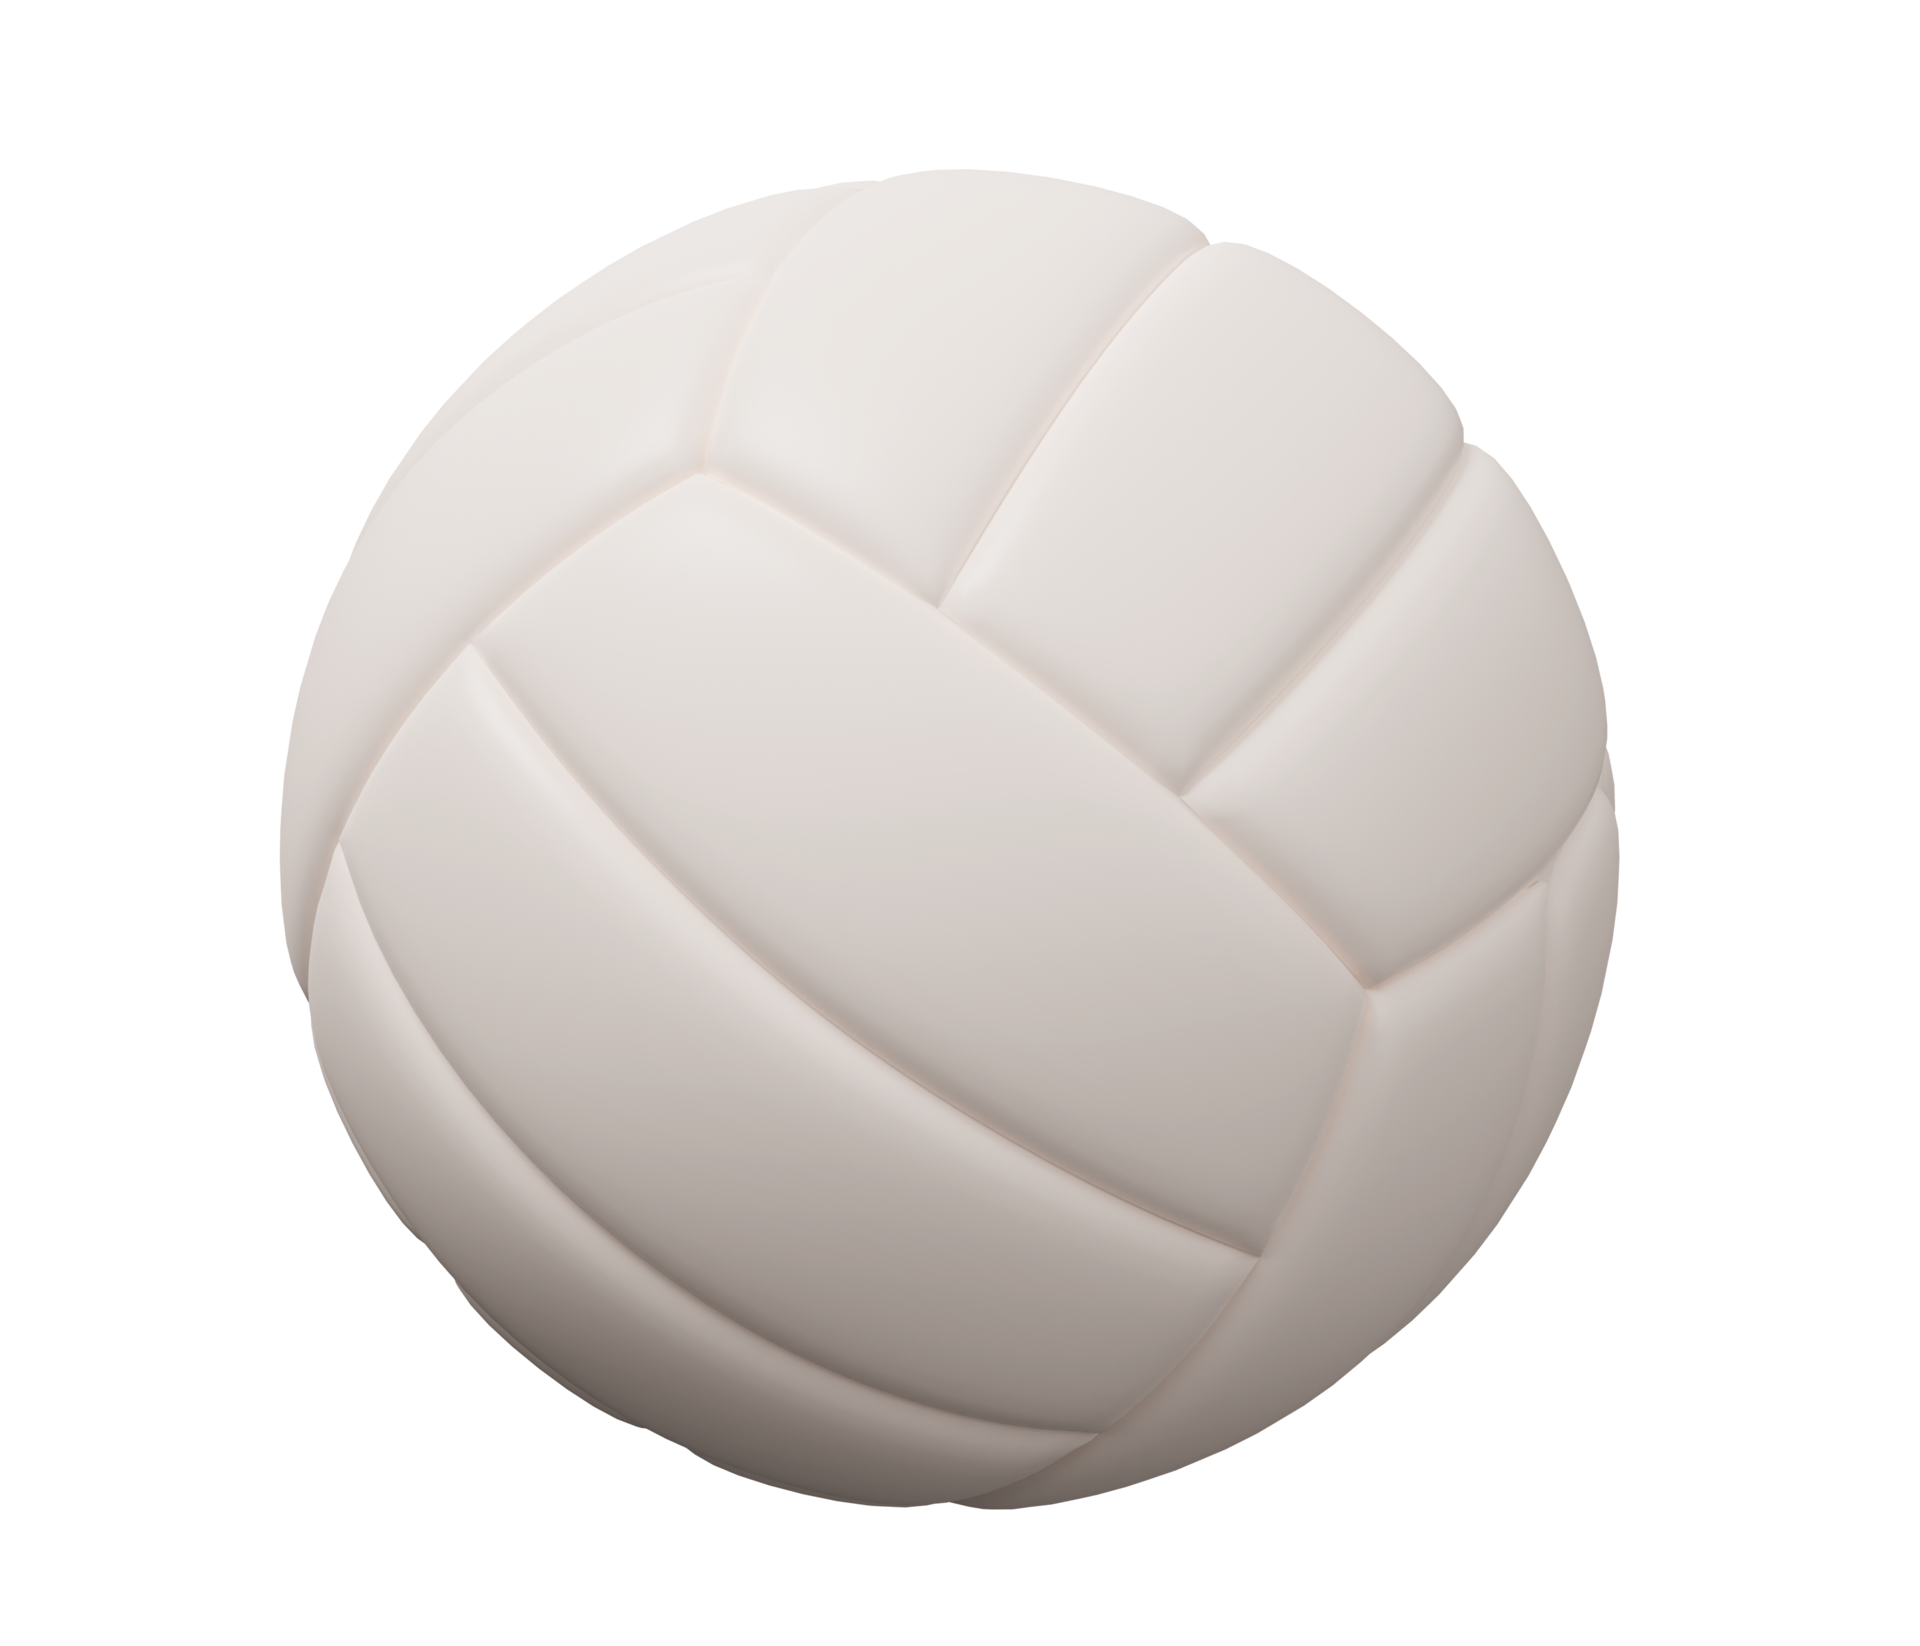 volleyball white ball 3d icon 21456529 PNG